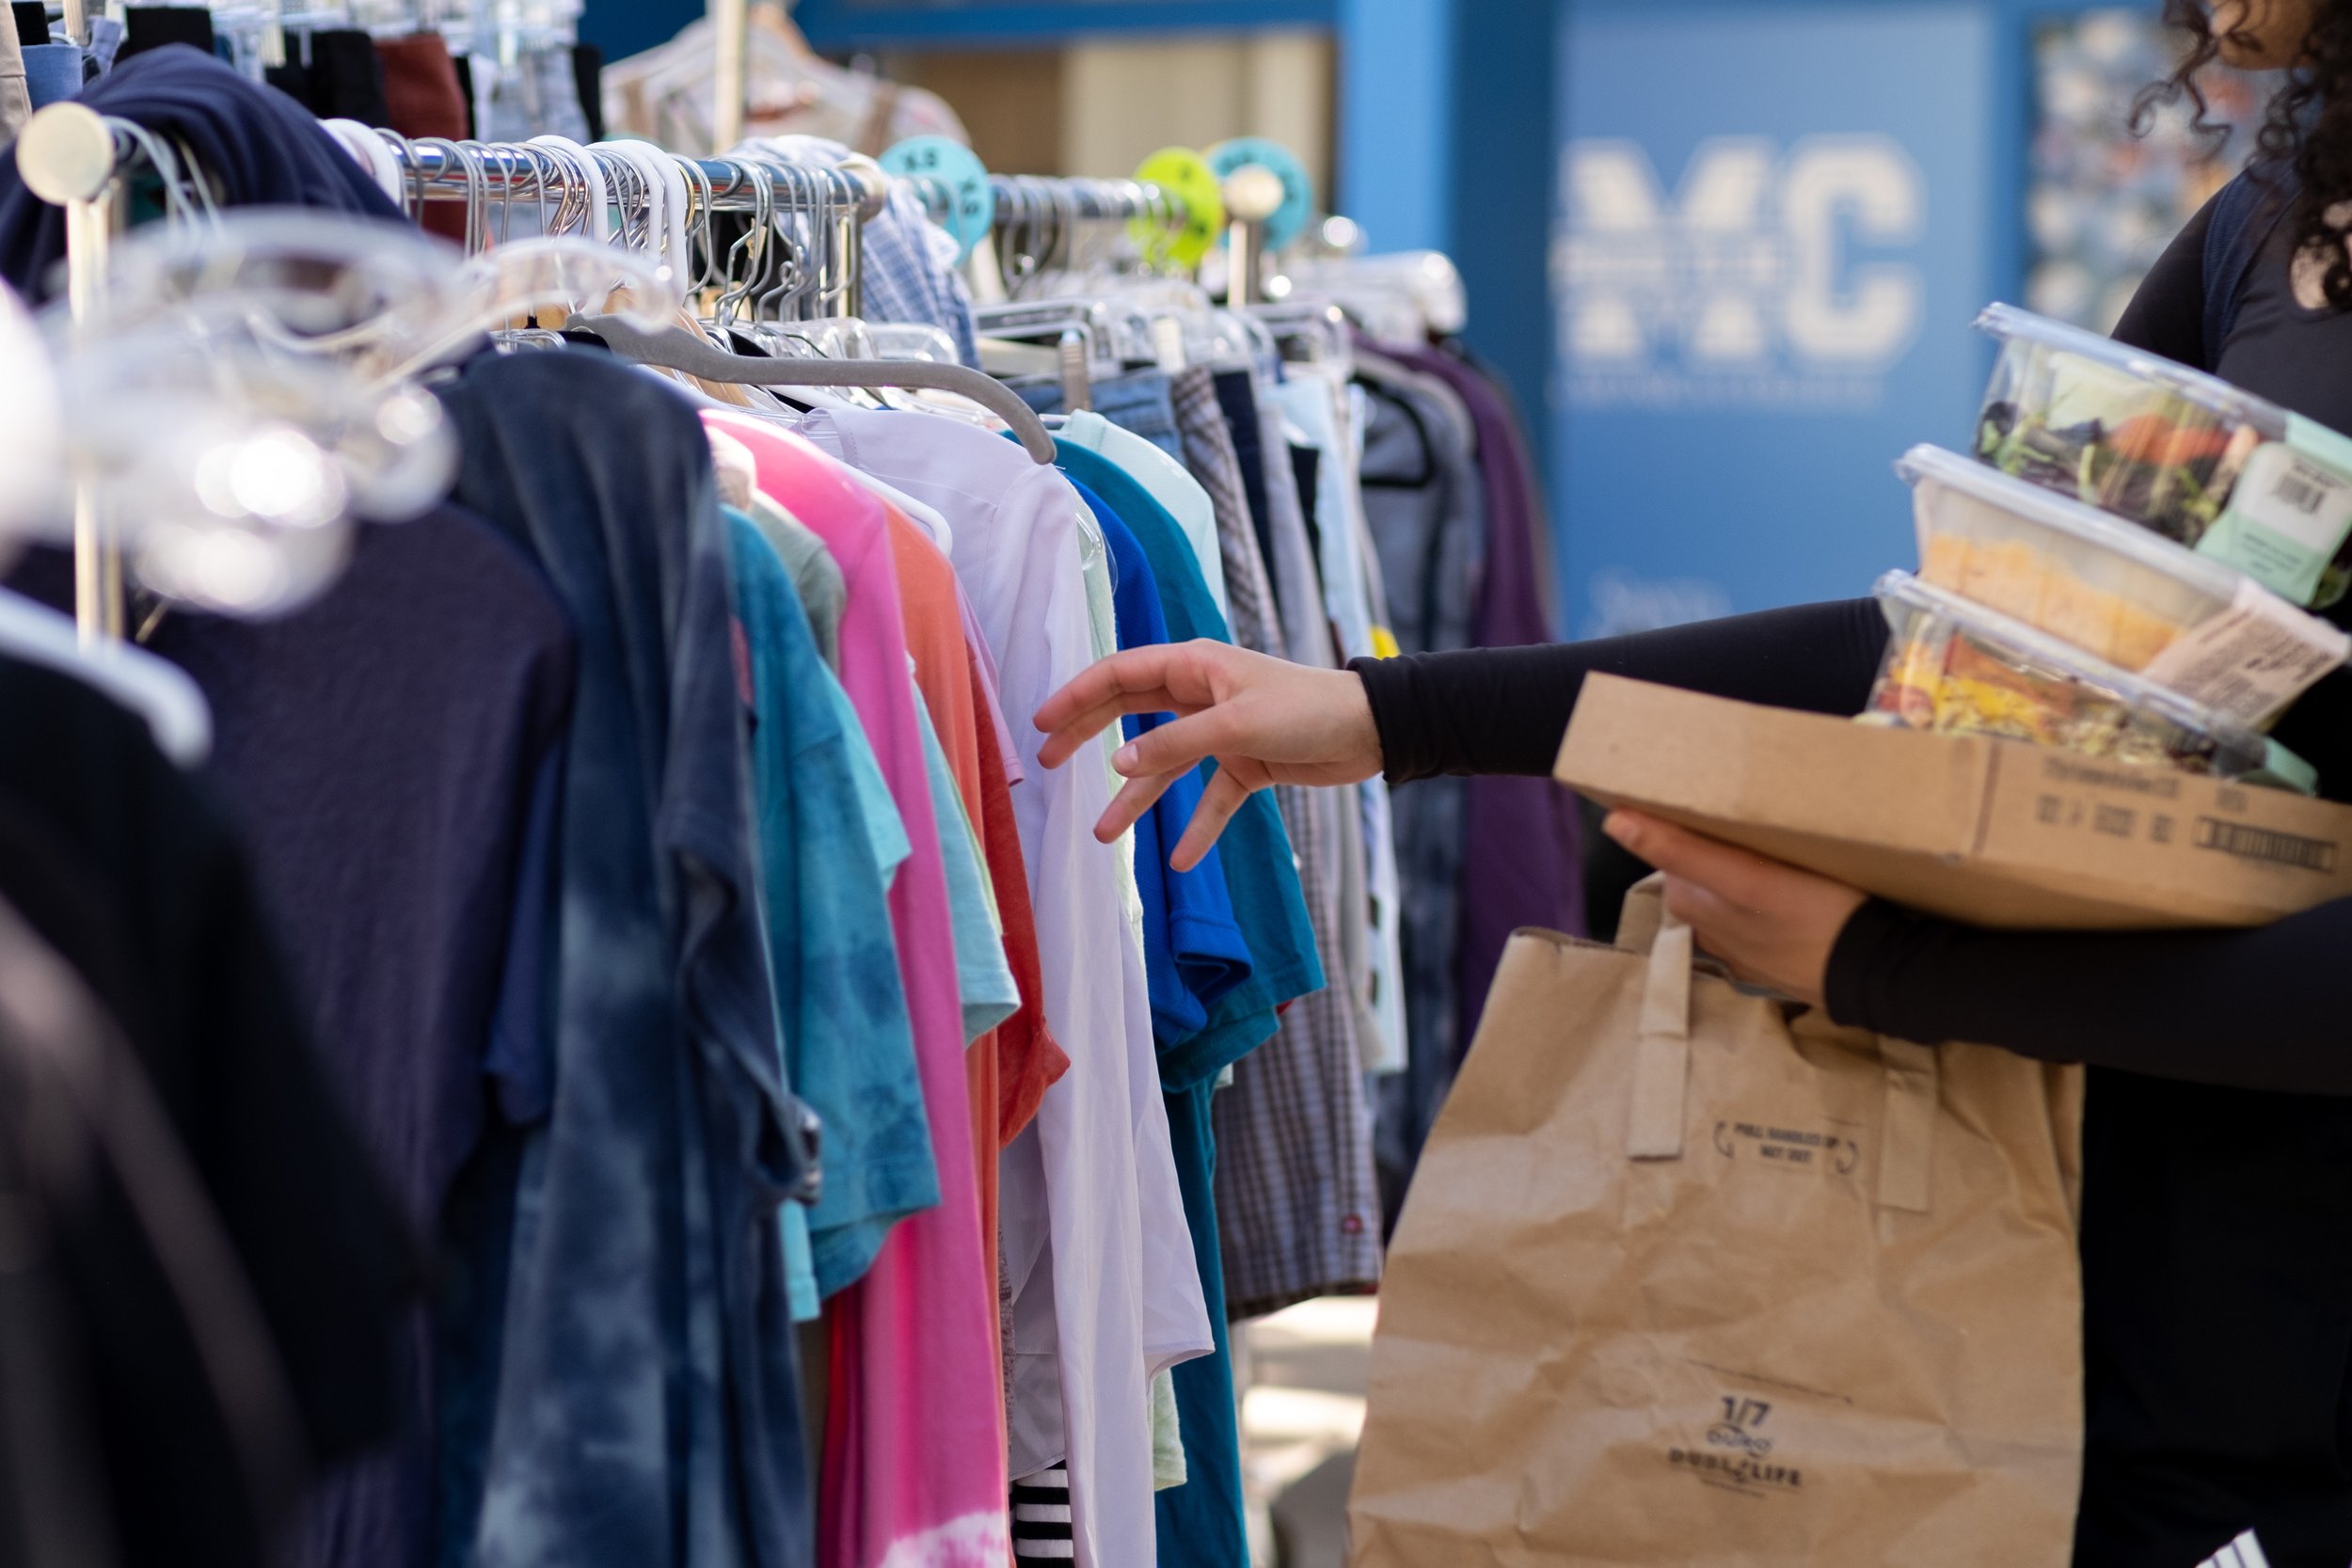  The Bodega is open, displaying clothes on racks in front of the food pantry next to the cafeteria on the Main Campus at Santa Monica College on Friday, April 21, 2023,  in Santa Monica, Calif. Students can take what they need. (Akemi Rico | The Cors